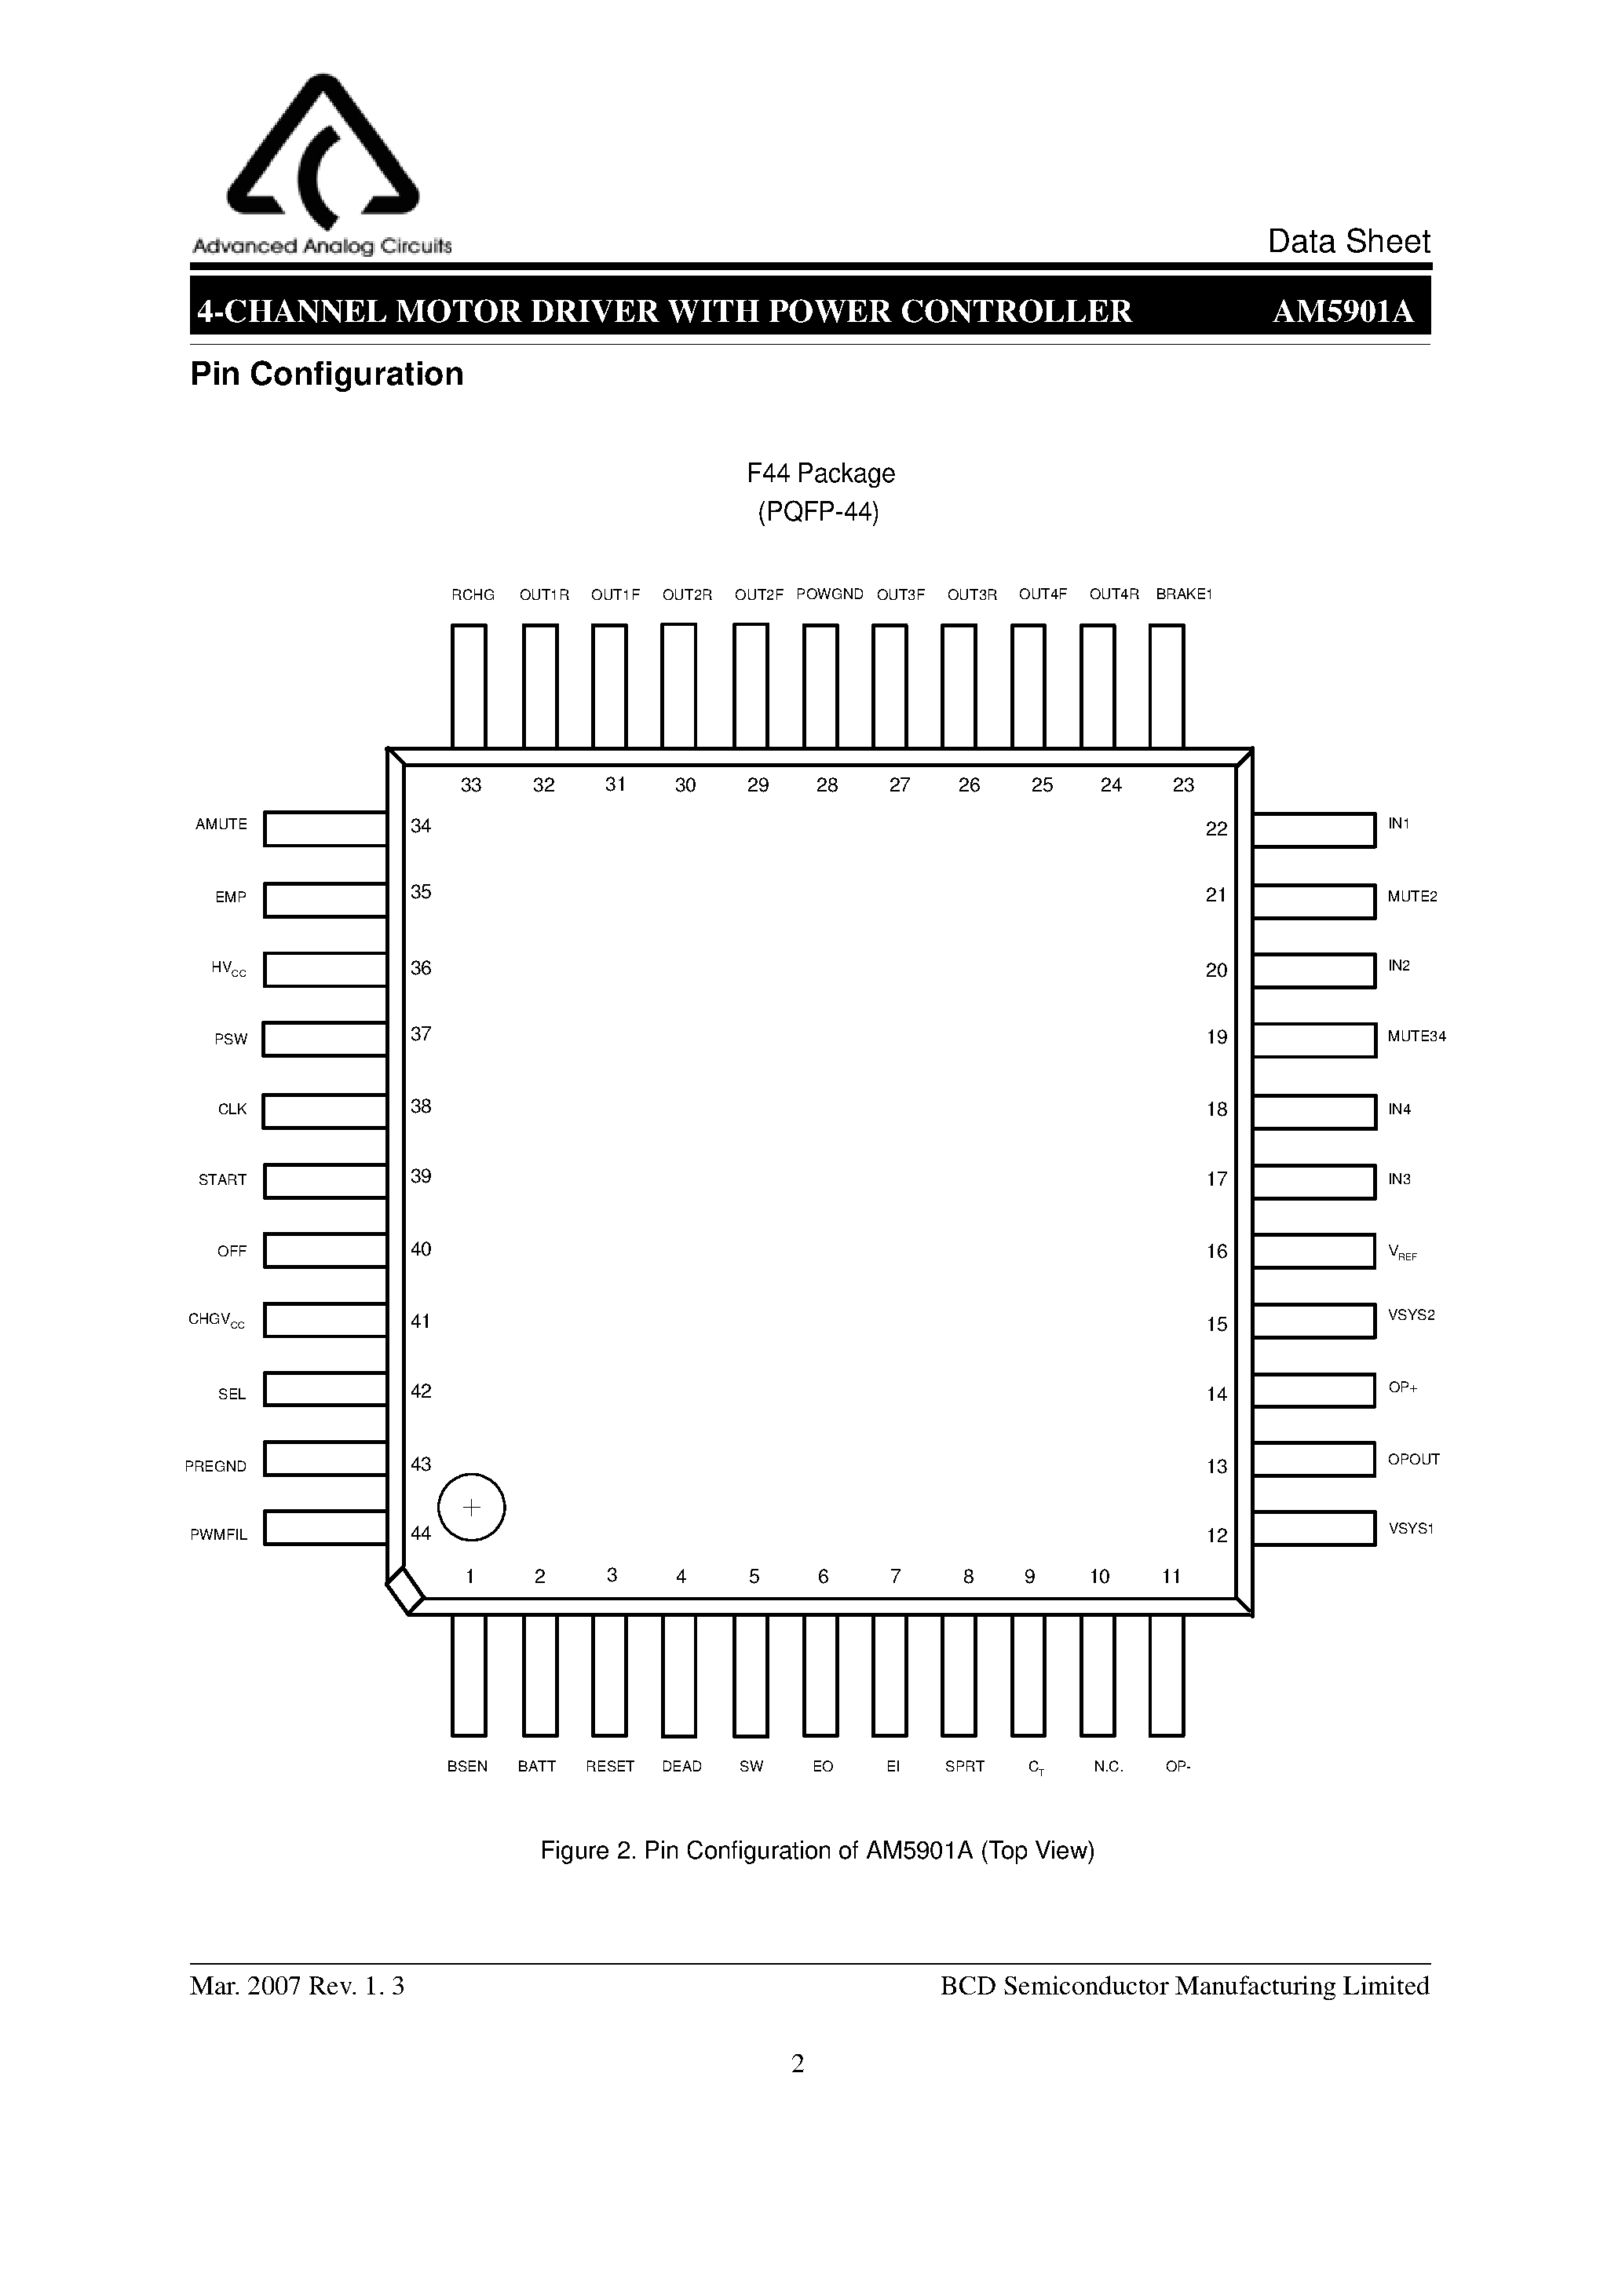 Datasheet AM5901A - 4-CHANNEL MOTOR DRIVER page 2